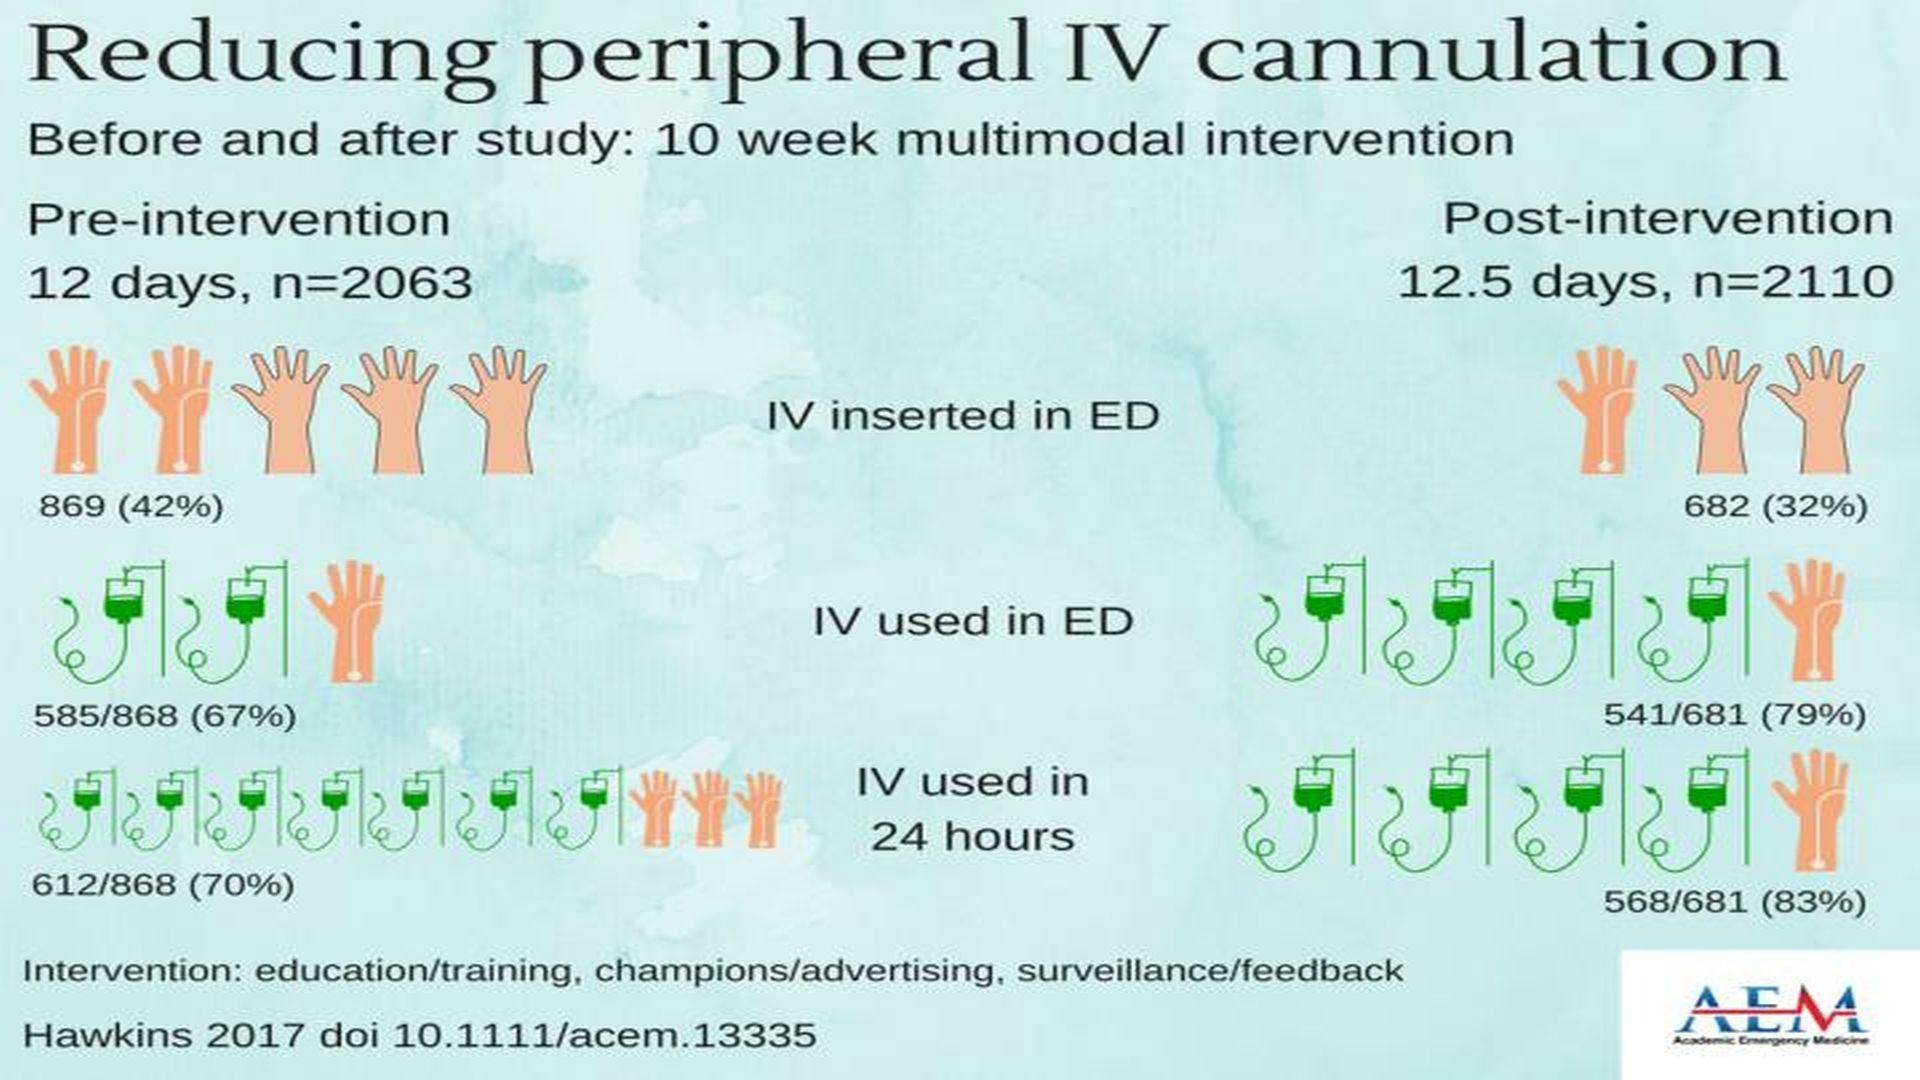 Multimodal Intervention Can Reduce PIVC Insertion in the Emergency Department